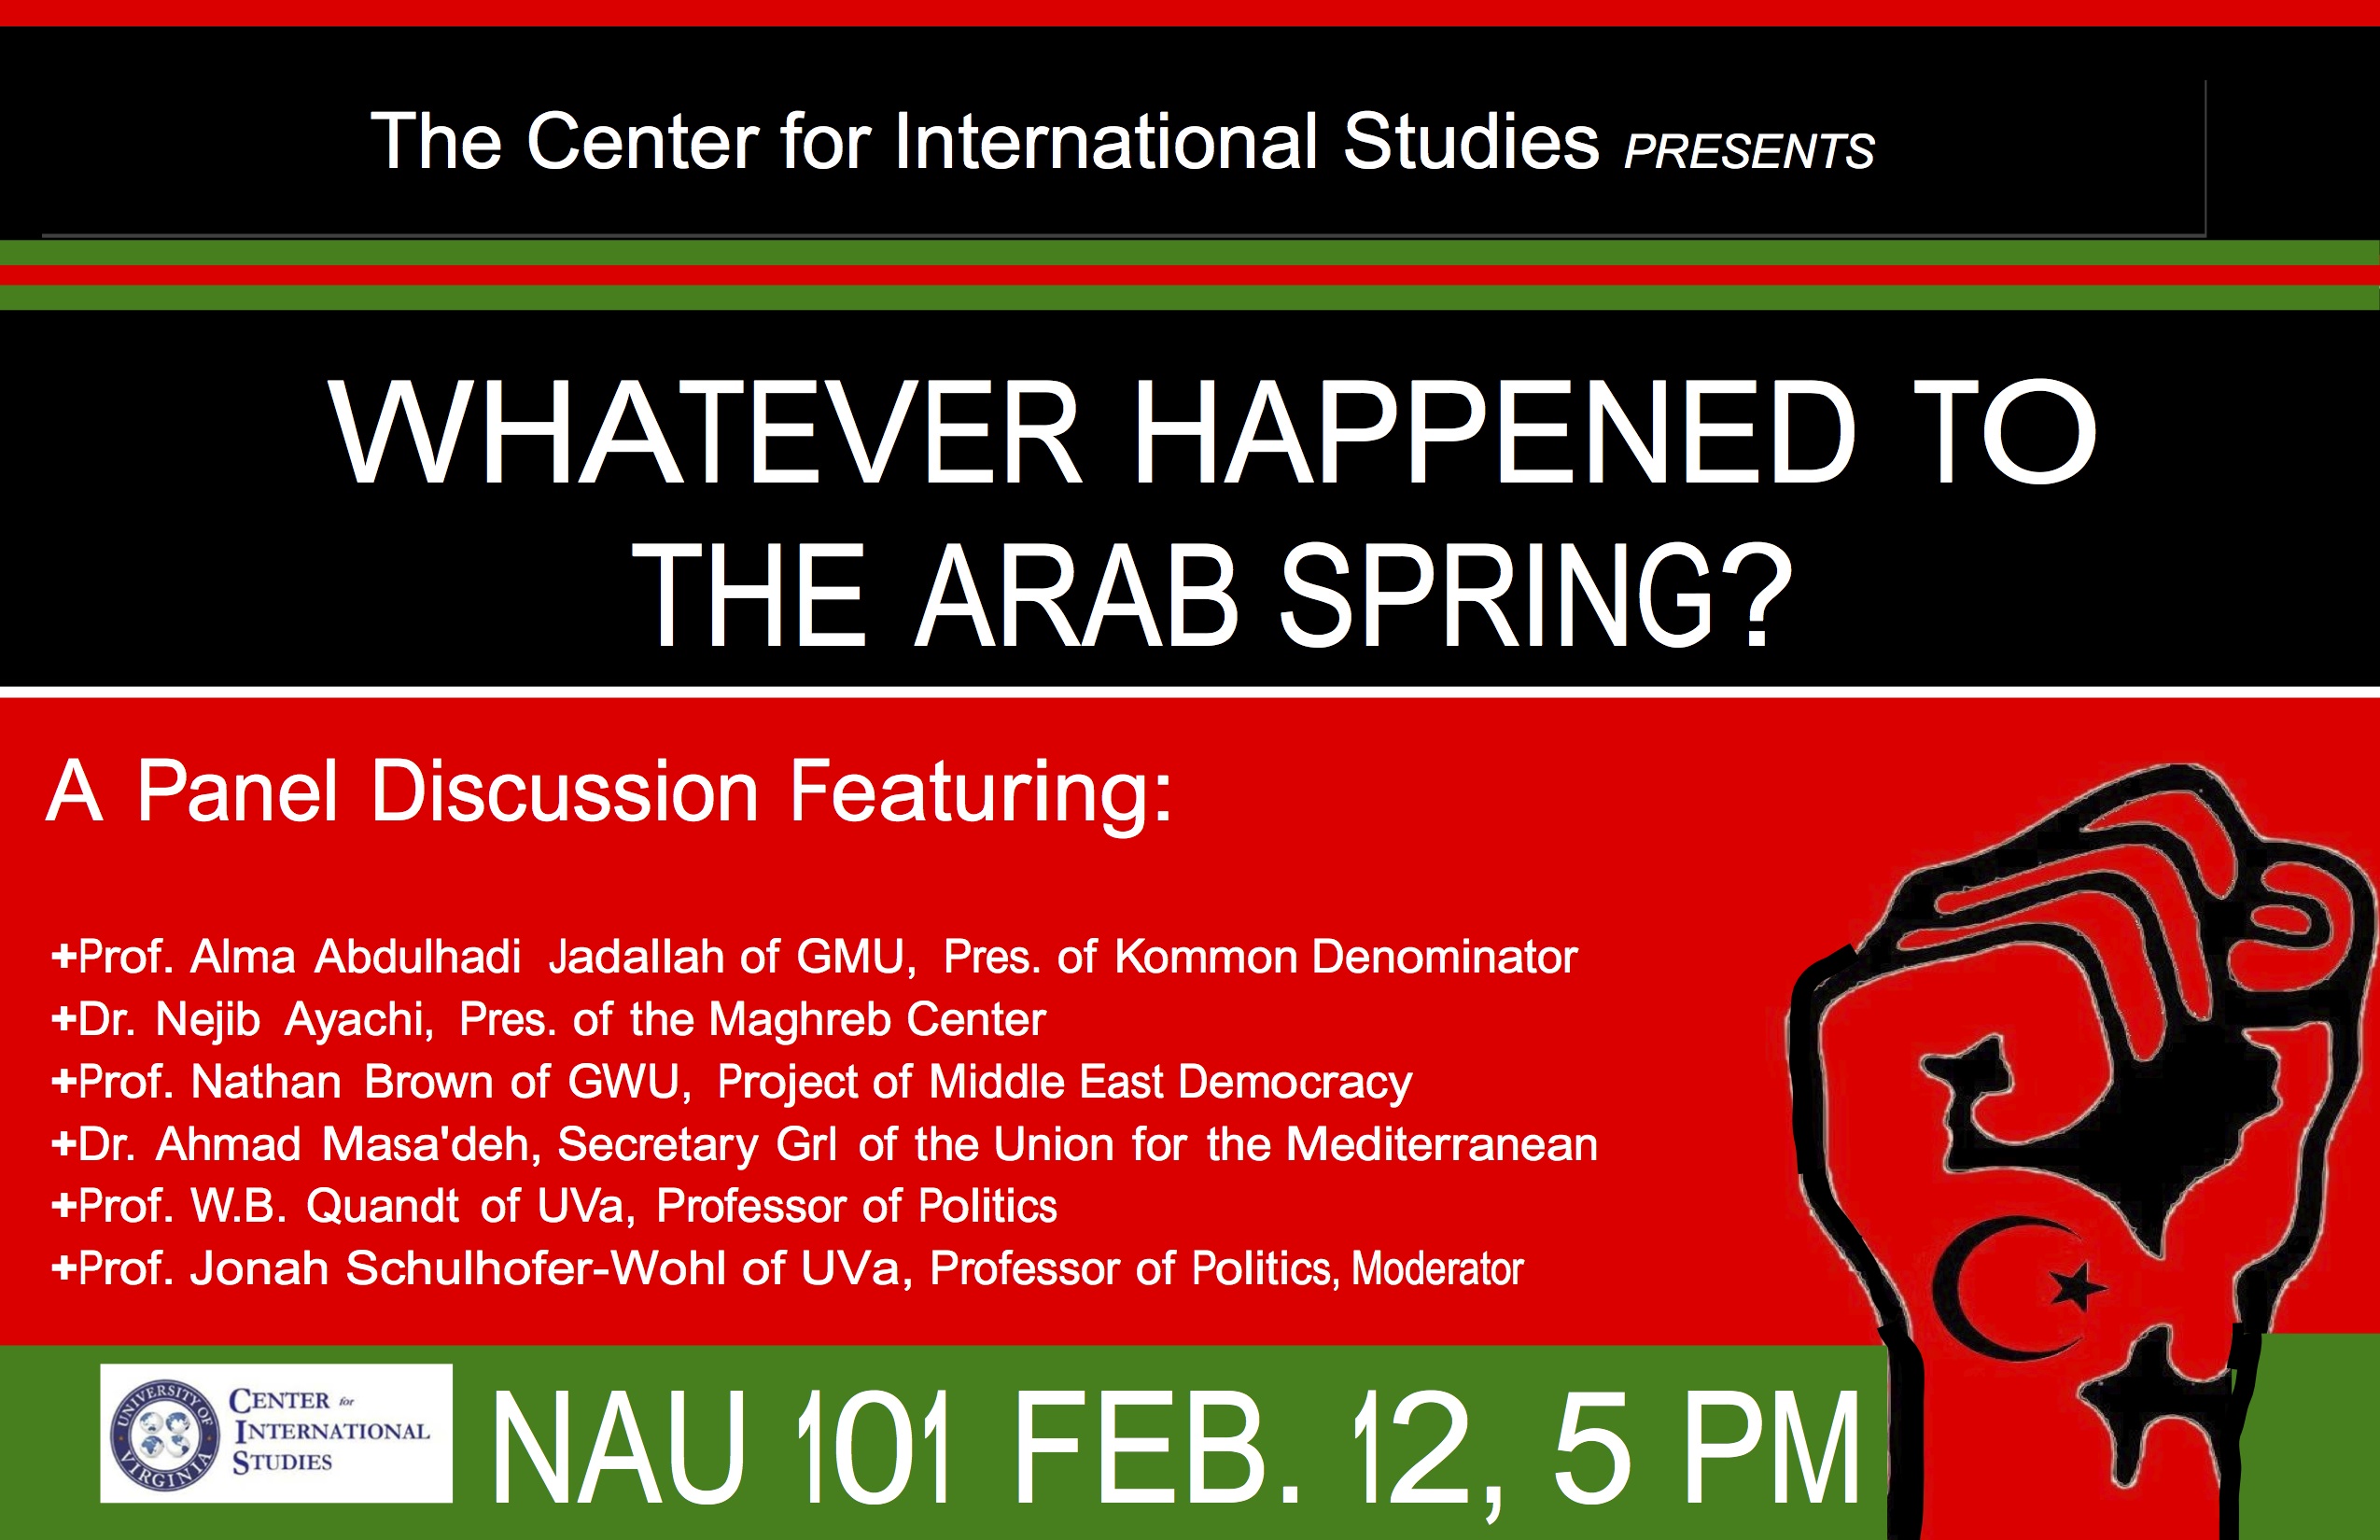 text reads: The Center for International Studies presents: Whatever Happened to the Arab Spring?  A panel discussion featuring: prof. Alma Abdulhadi Jadallah of GMU, prs. of Kommon Dnominator, Dr. Nejib Ayachi, Pres. of the Mahreb Center, Prof. Nathan Brown of GWU, Project of Middle East Democracy, Dr. Ahmad Masa'deh, Secretary Grl of the Union of the Mediterranean, Prof. W.B. Quandt of UVA, Professor of Politics, and Prof. Jonah Schulhofer-Wohl of UVA, Professor of Polictics, Moderator. NAU 101 Feb. 12, 5p